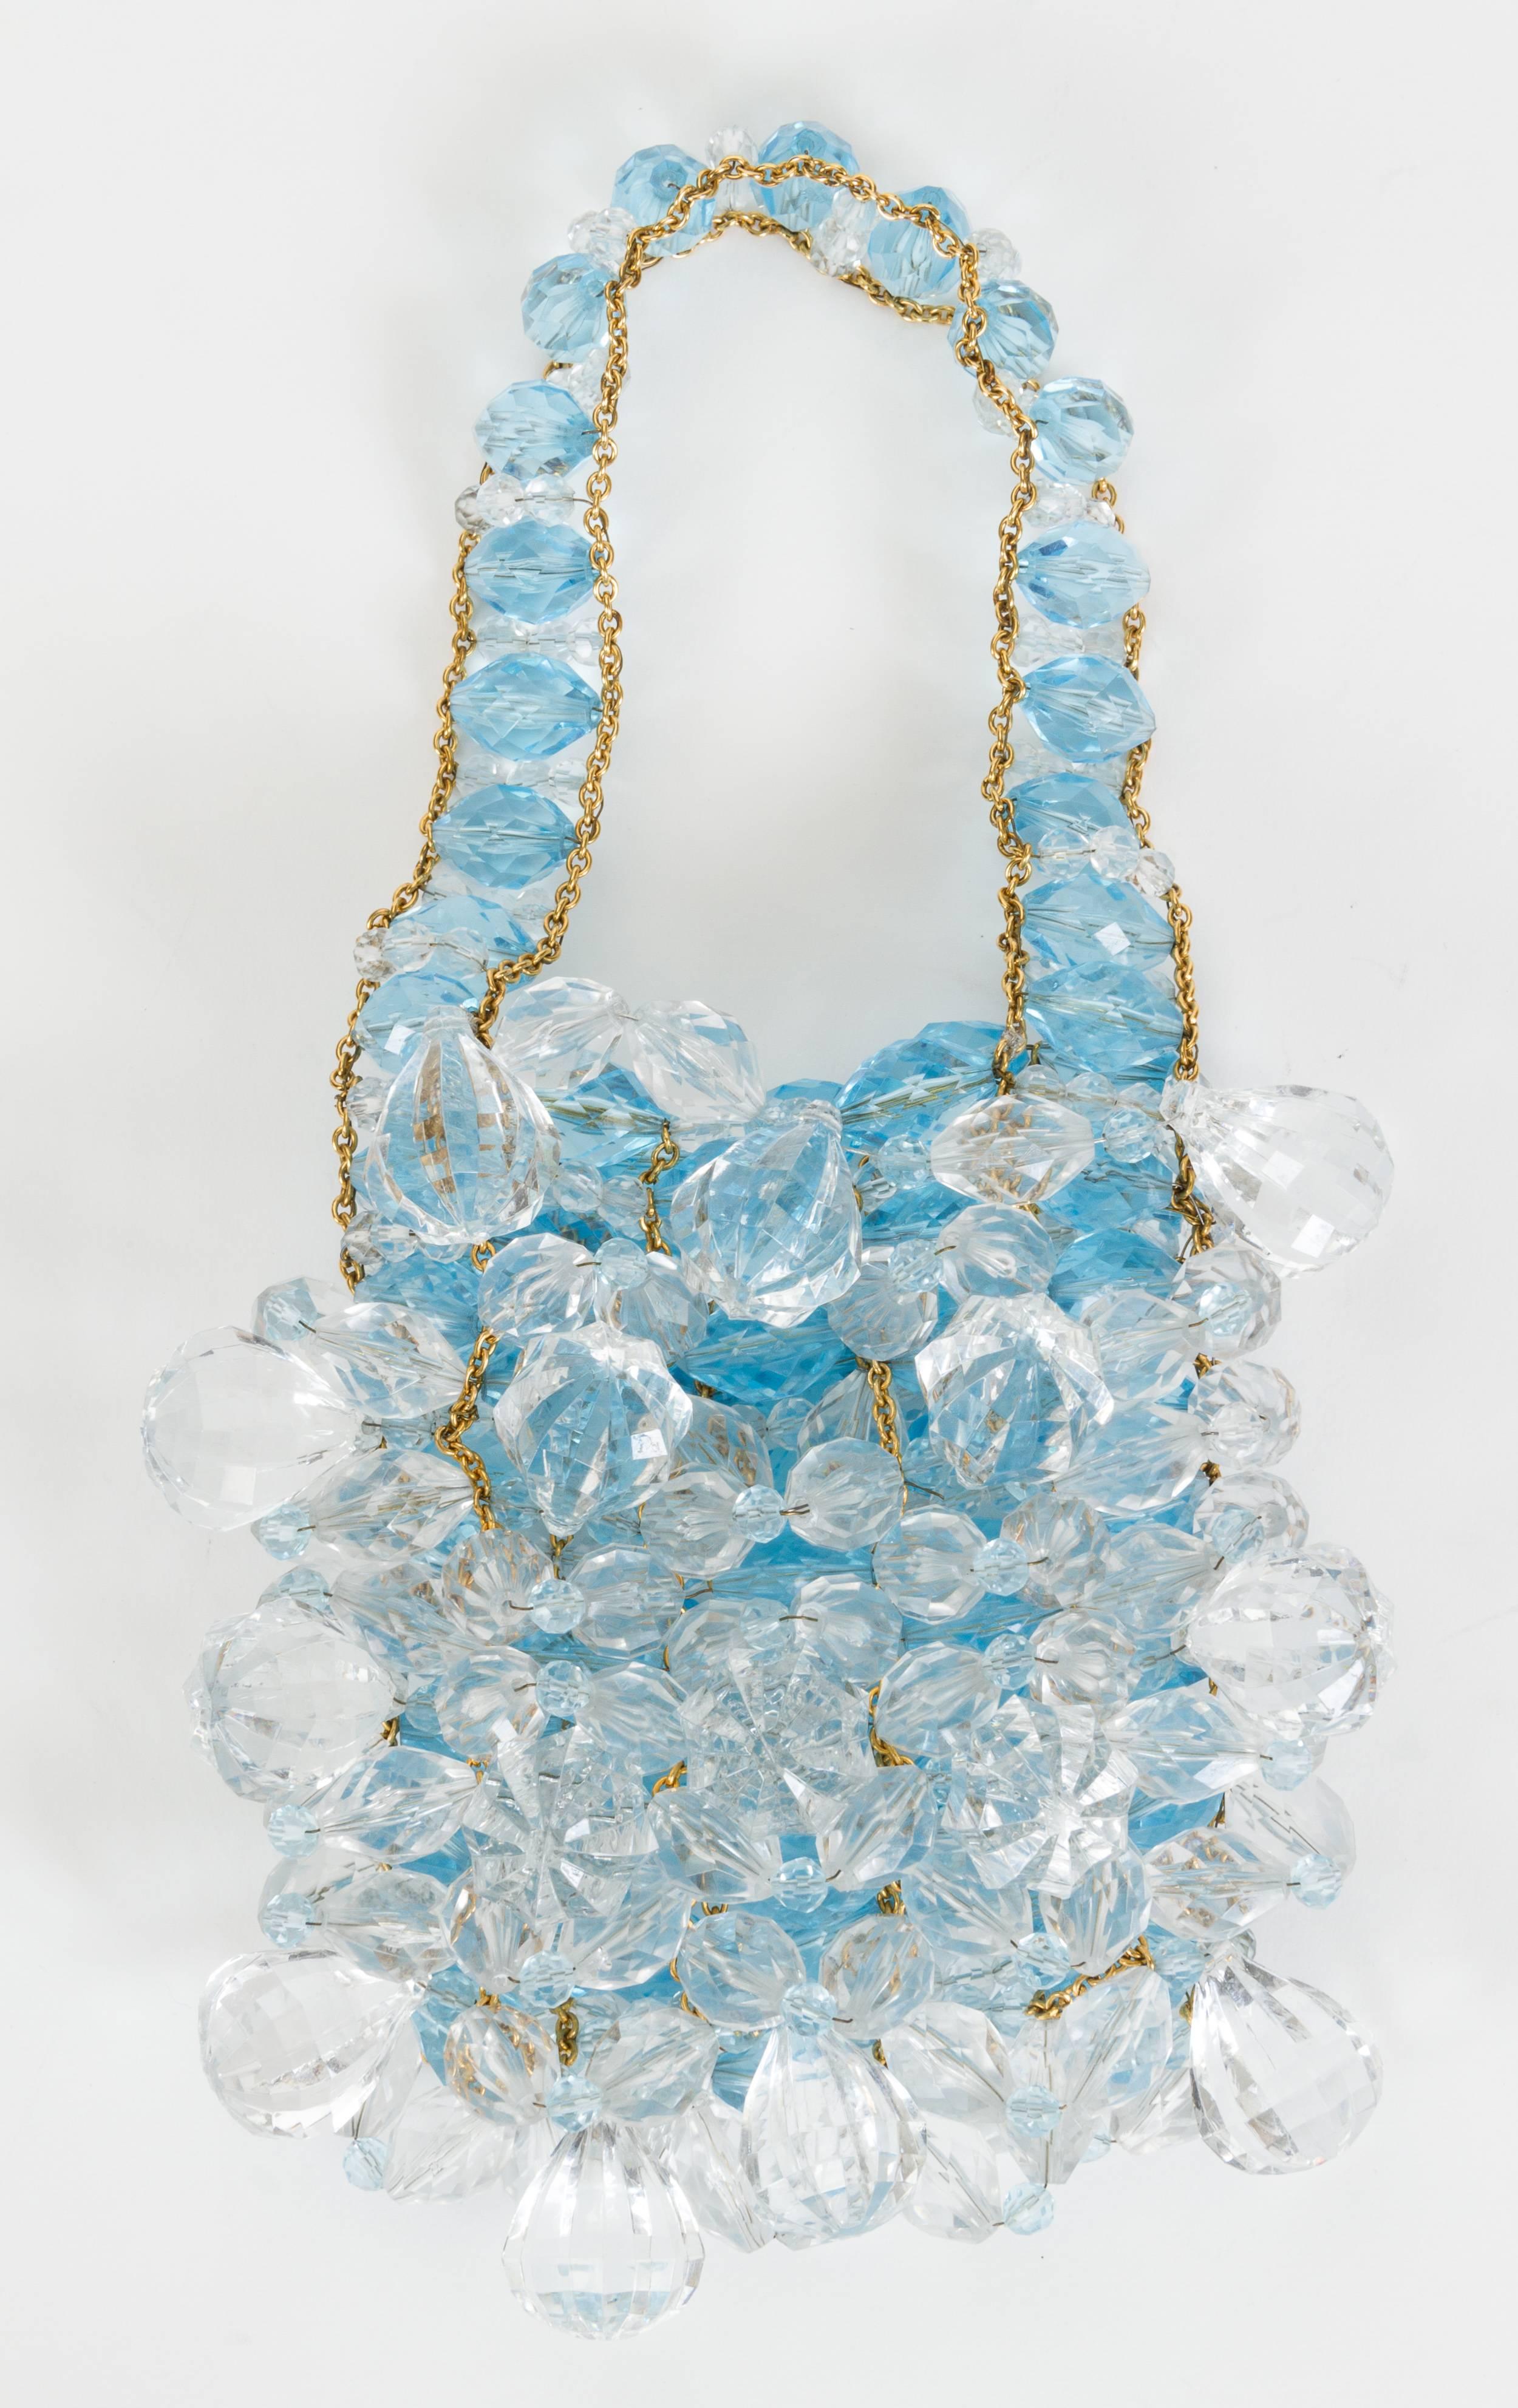 Chanel evening bag adorned with clear and celeste Lucite beads. Goldtone chain. Shoulder drop, 5.5